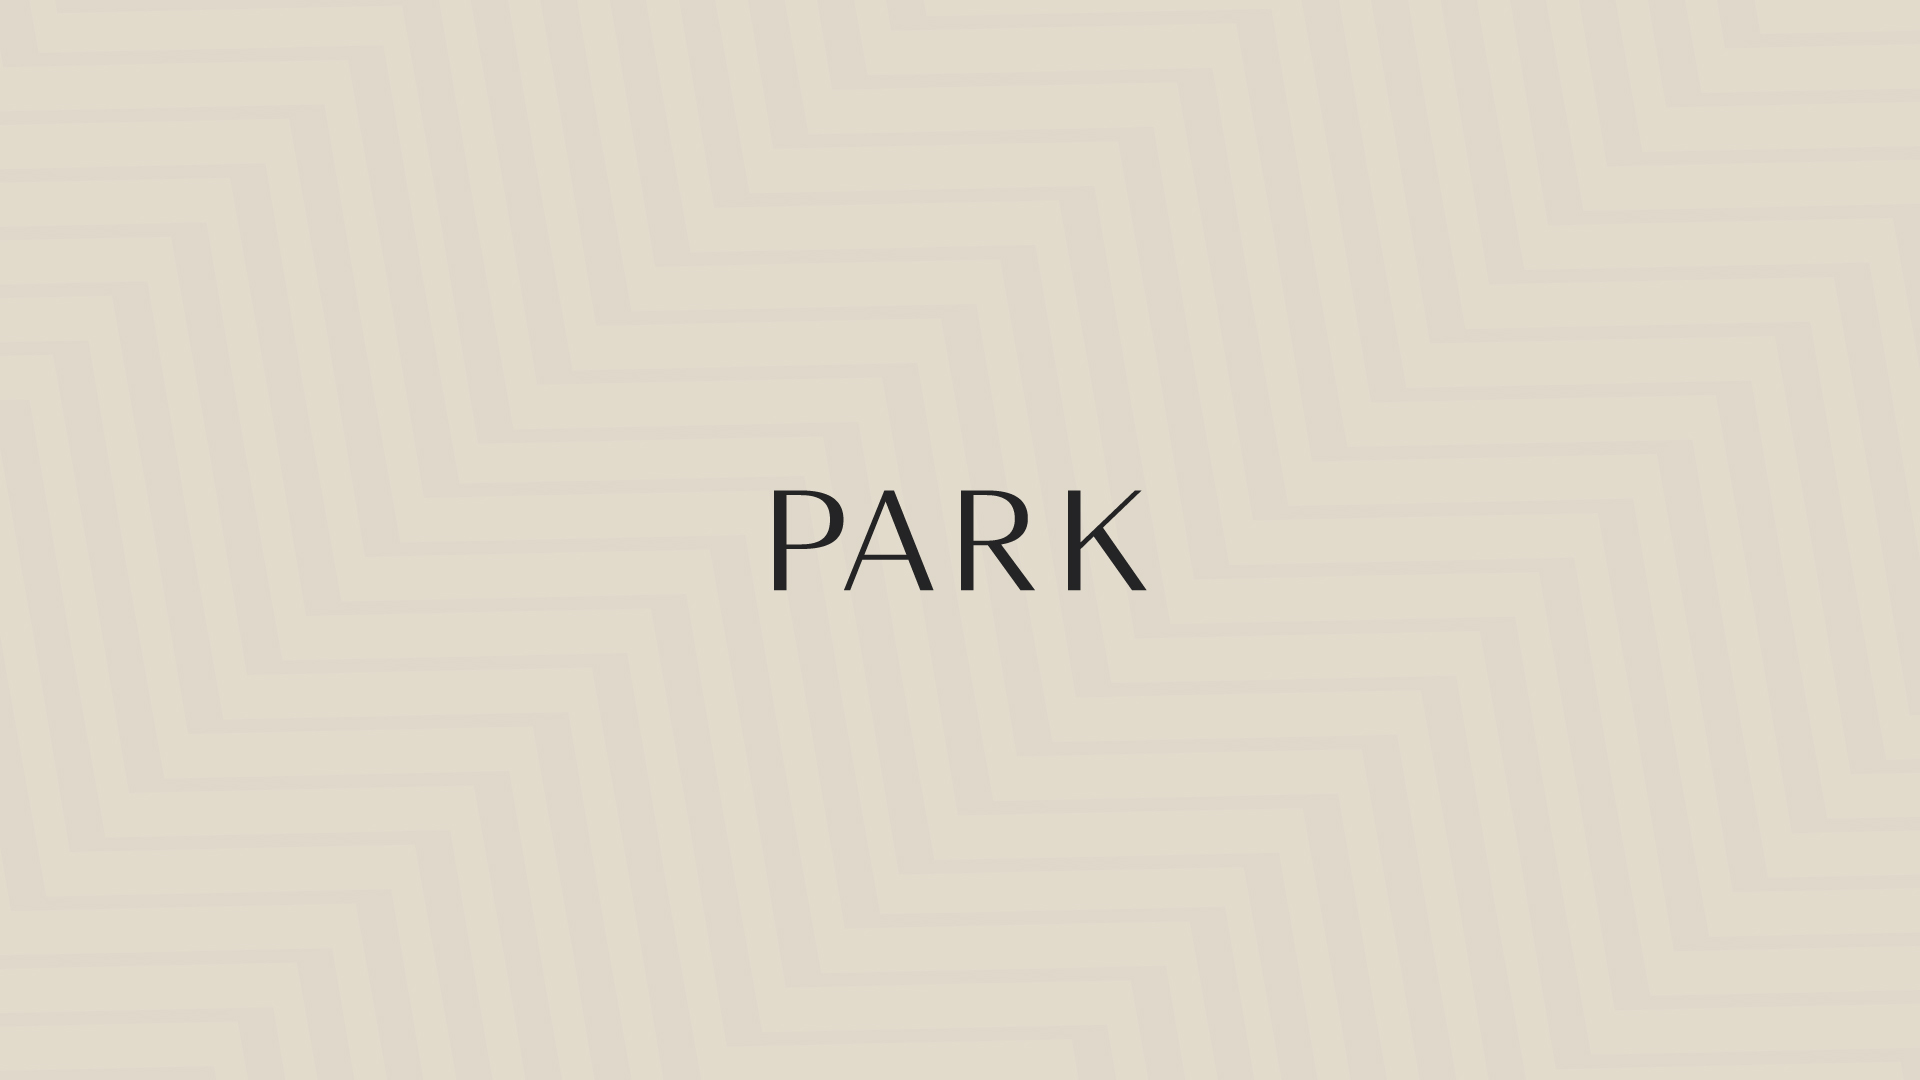 Park by Tosito